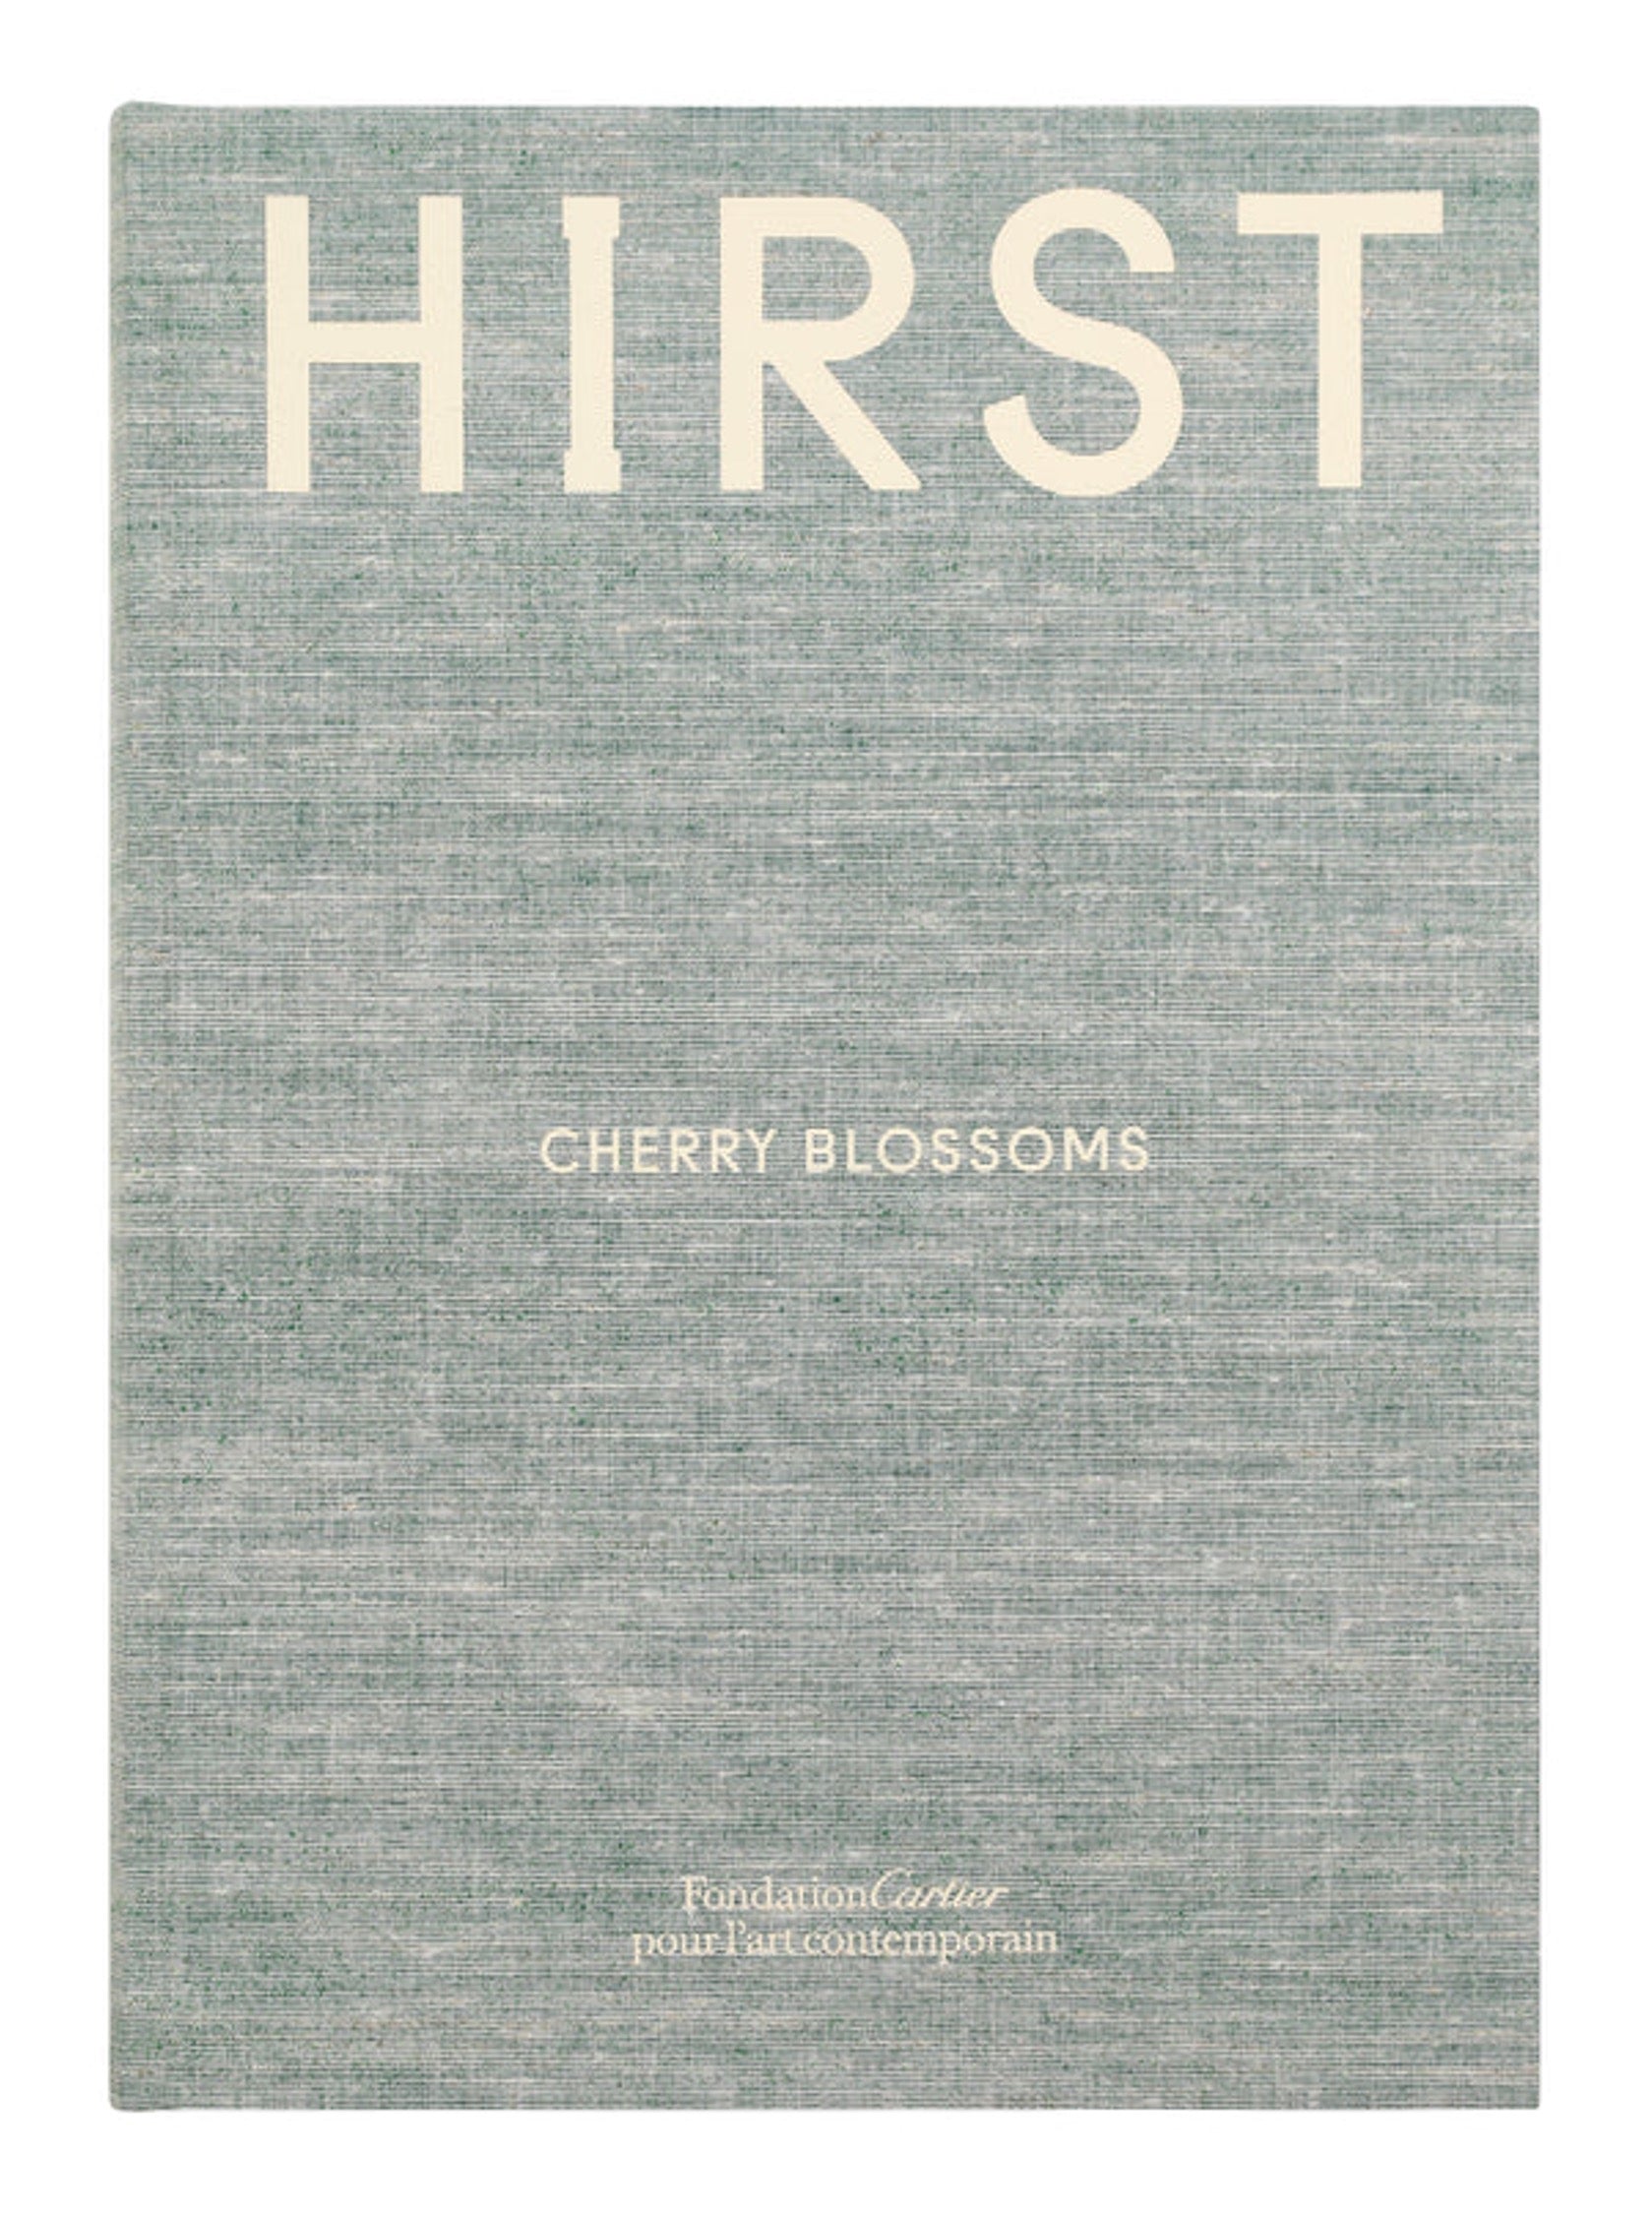 Damien Hirst Cherry Blossoms front cover.